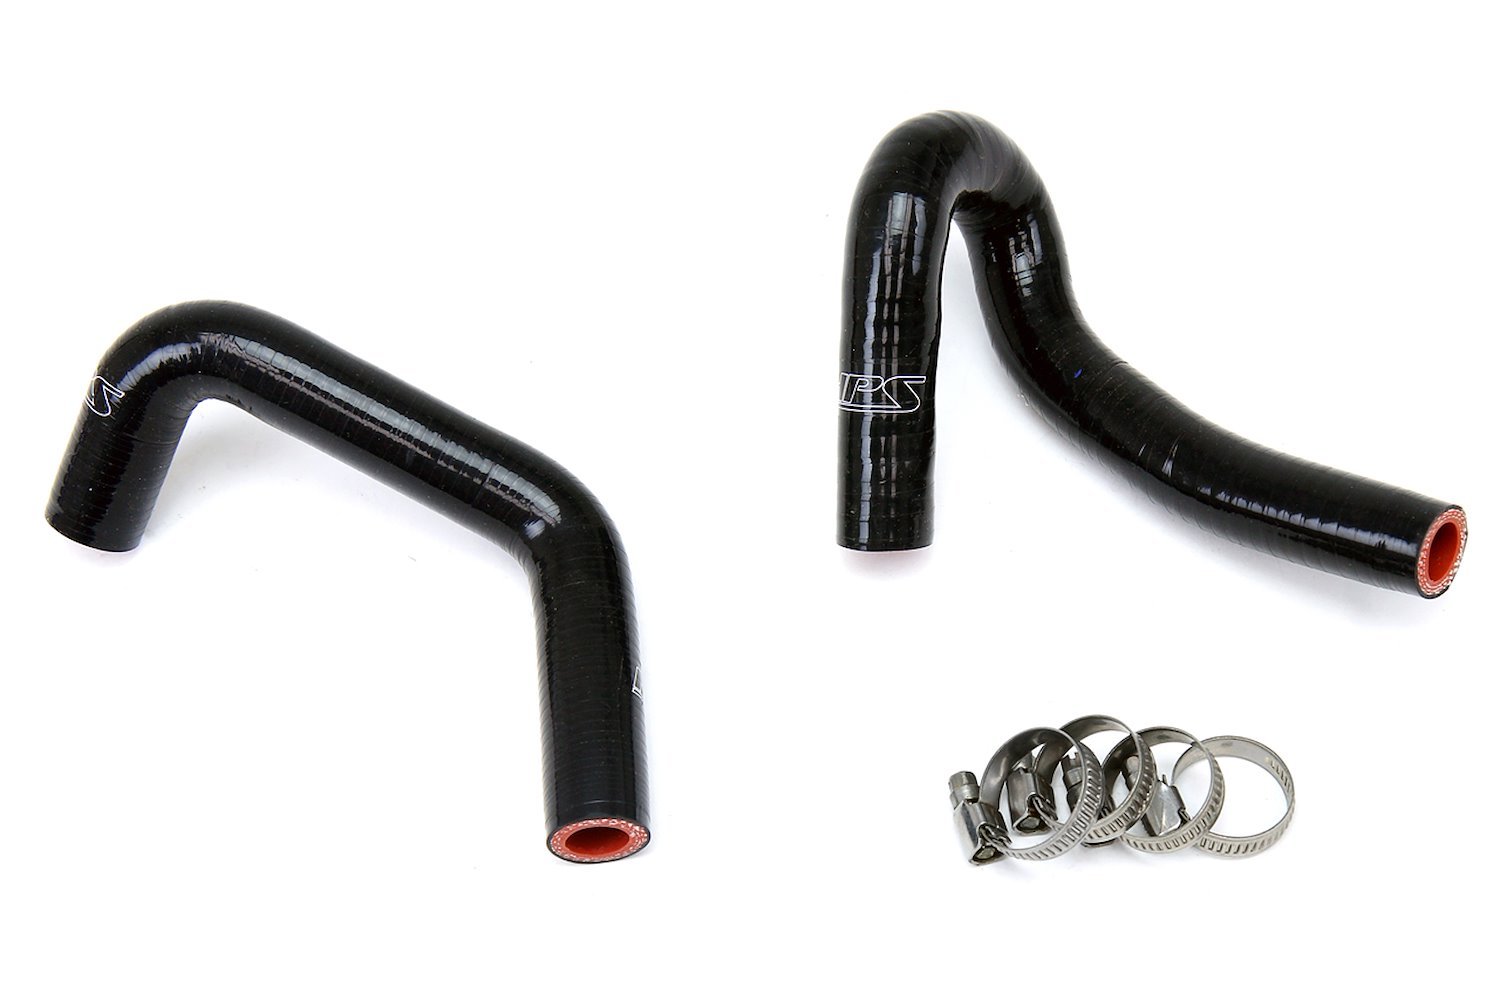 57-1311-BLK Heater Hose Kit, High-Temp 3-Ply Reinforced Silicone, Replace OEM Rubber Heater Coolant Hoses